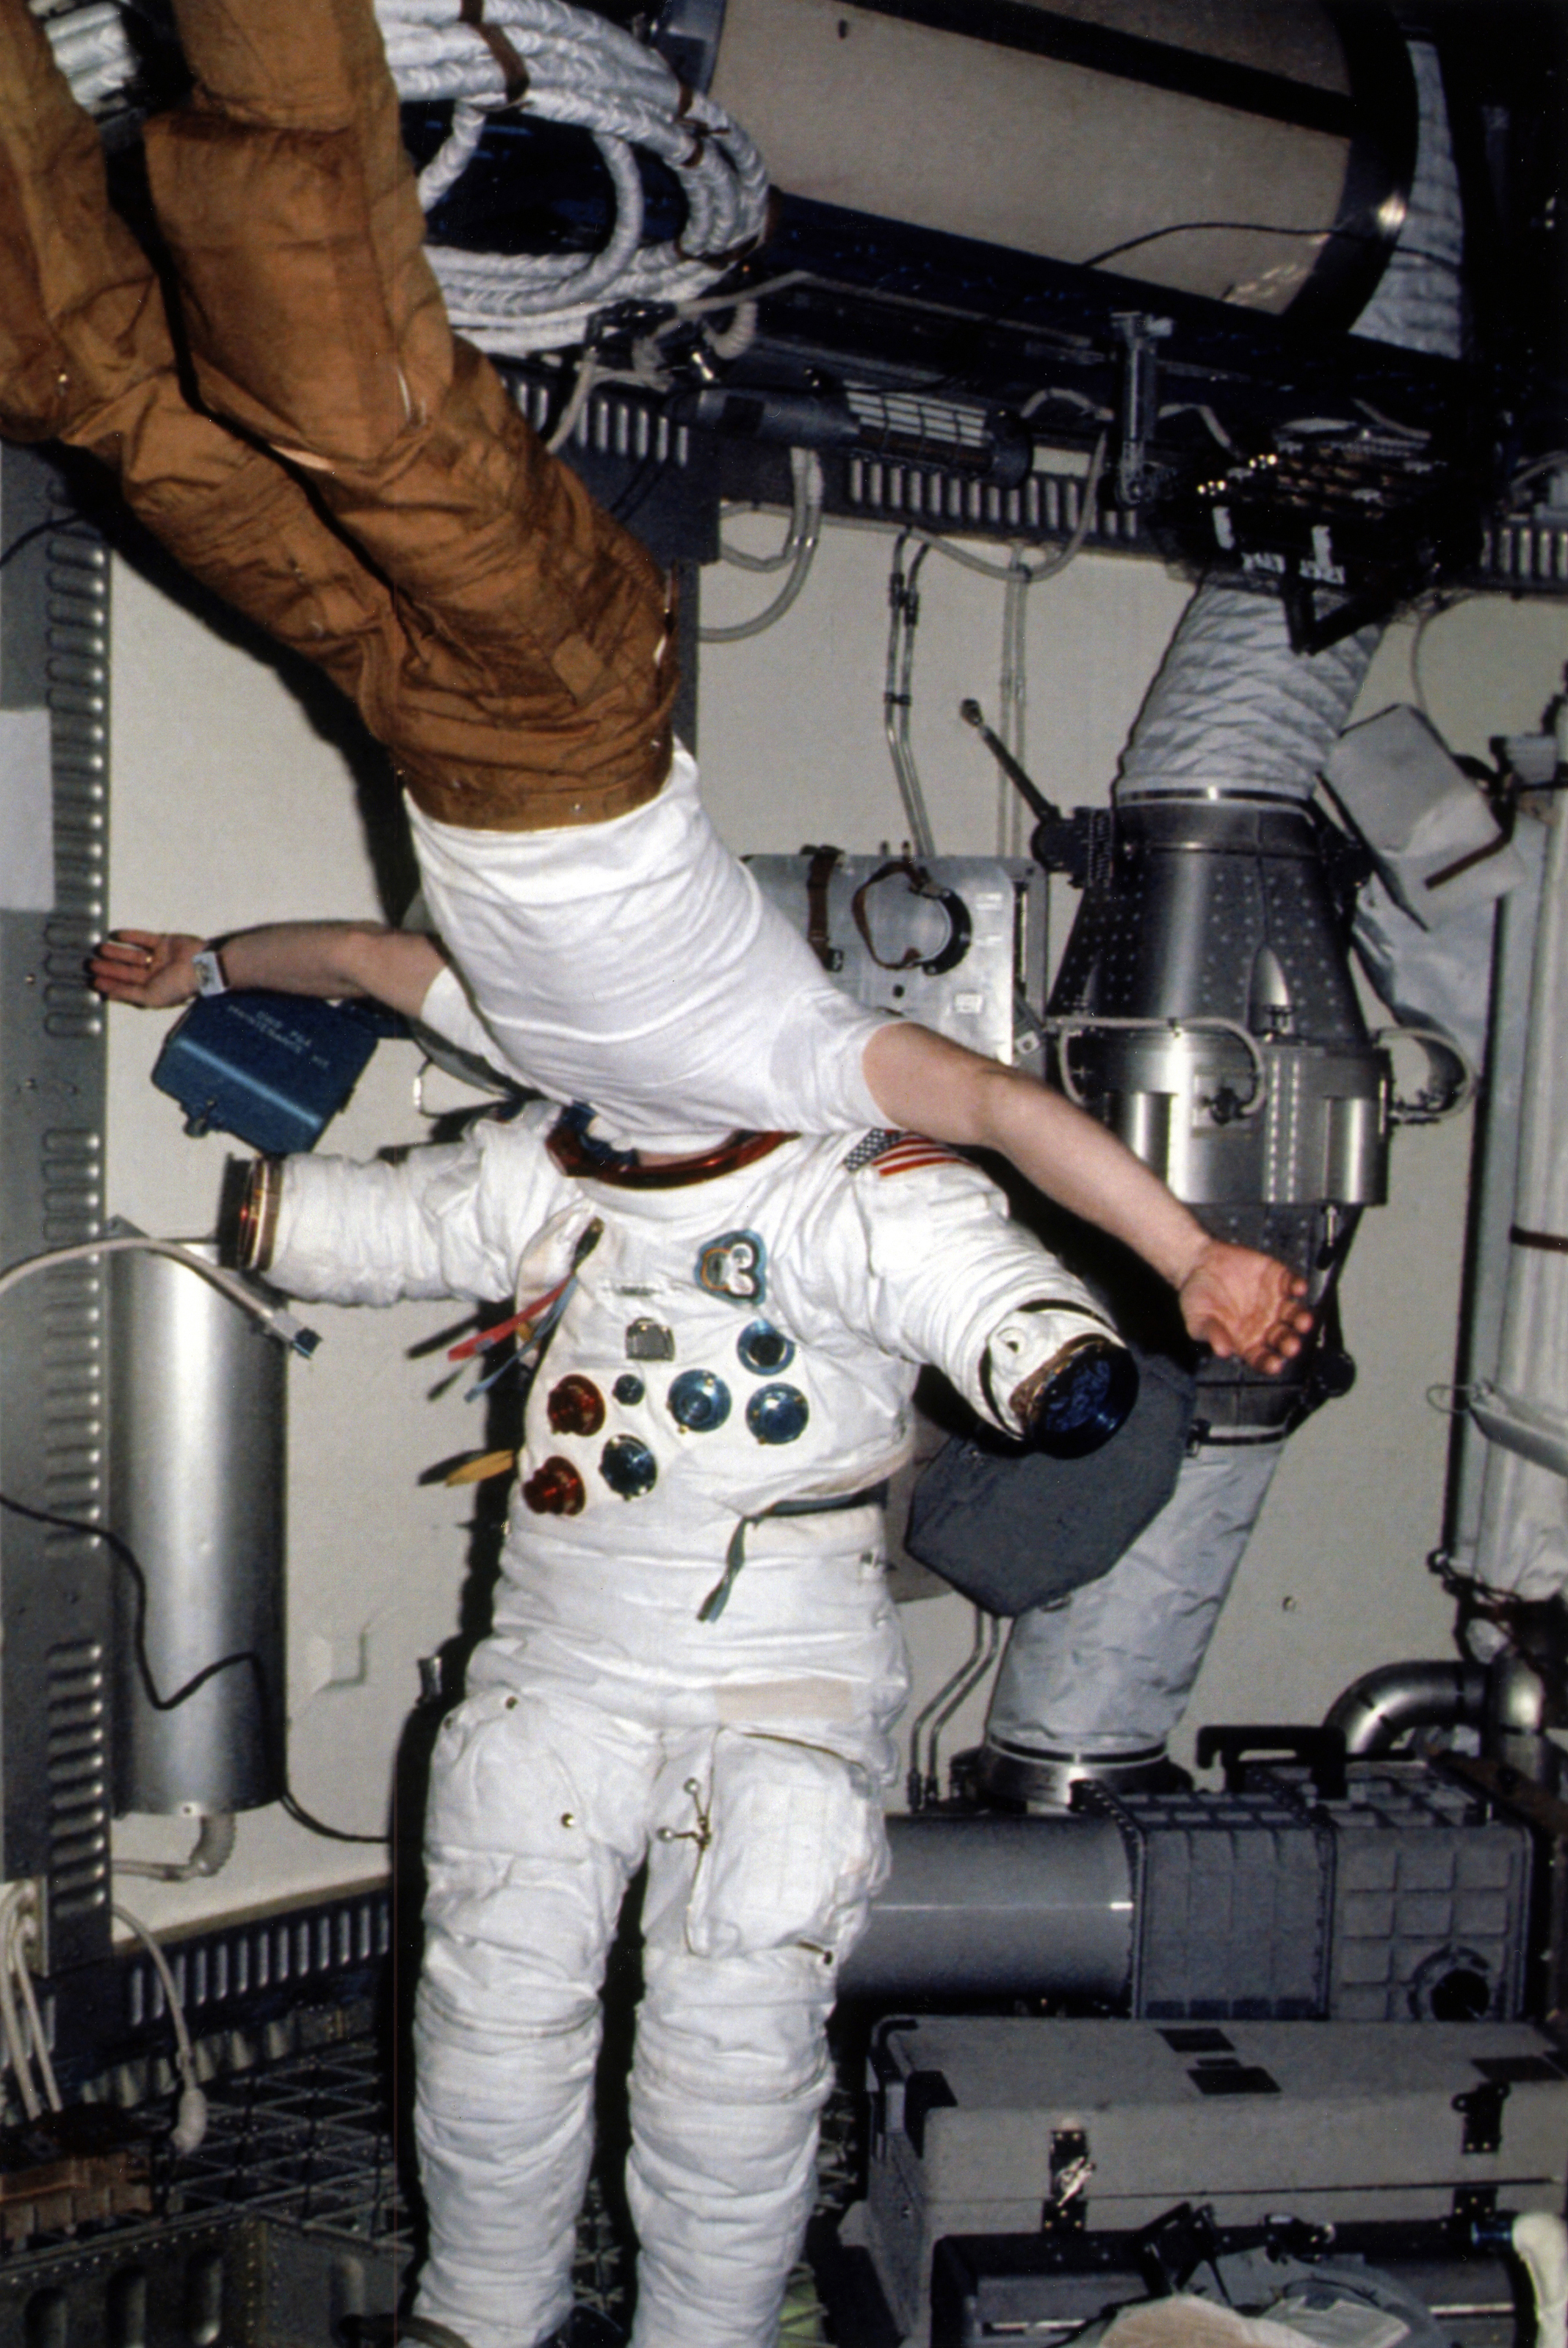 Edward G. Gibson performs an in-depth inspection of his spacesuit